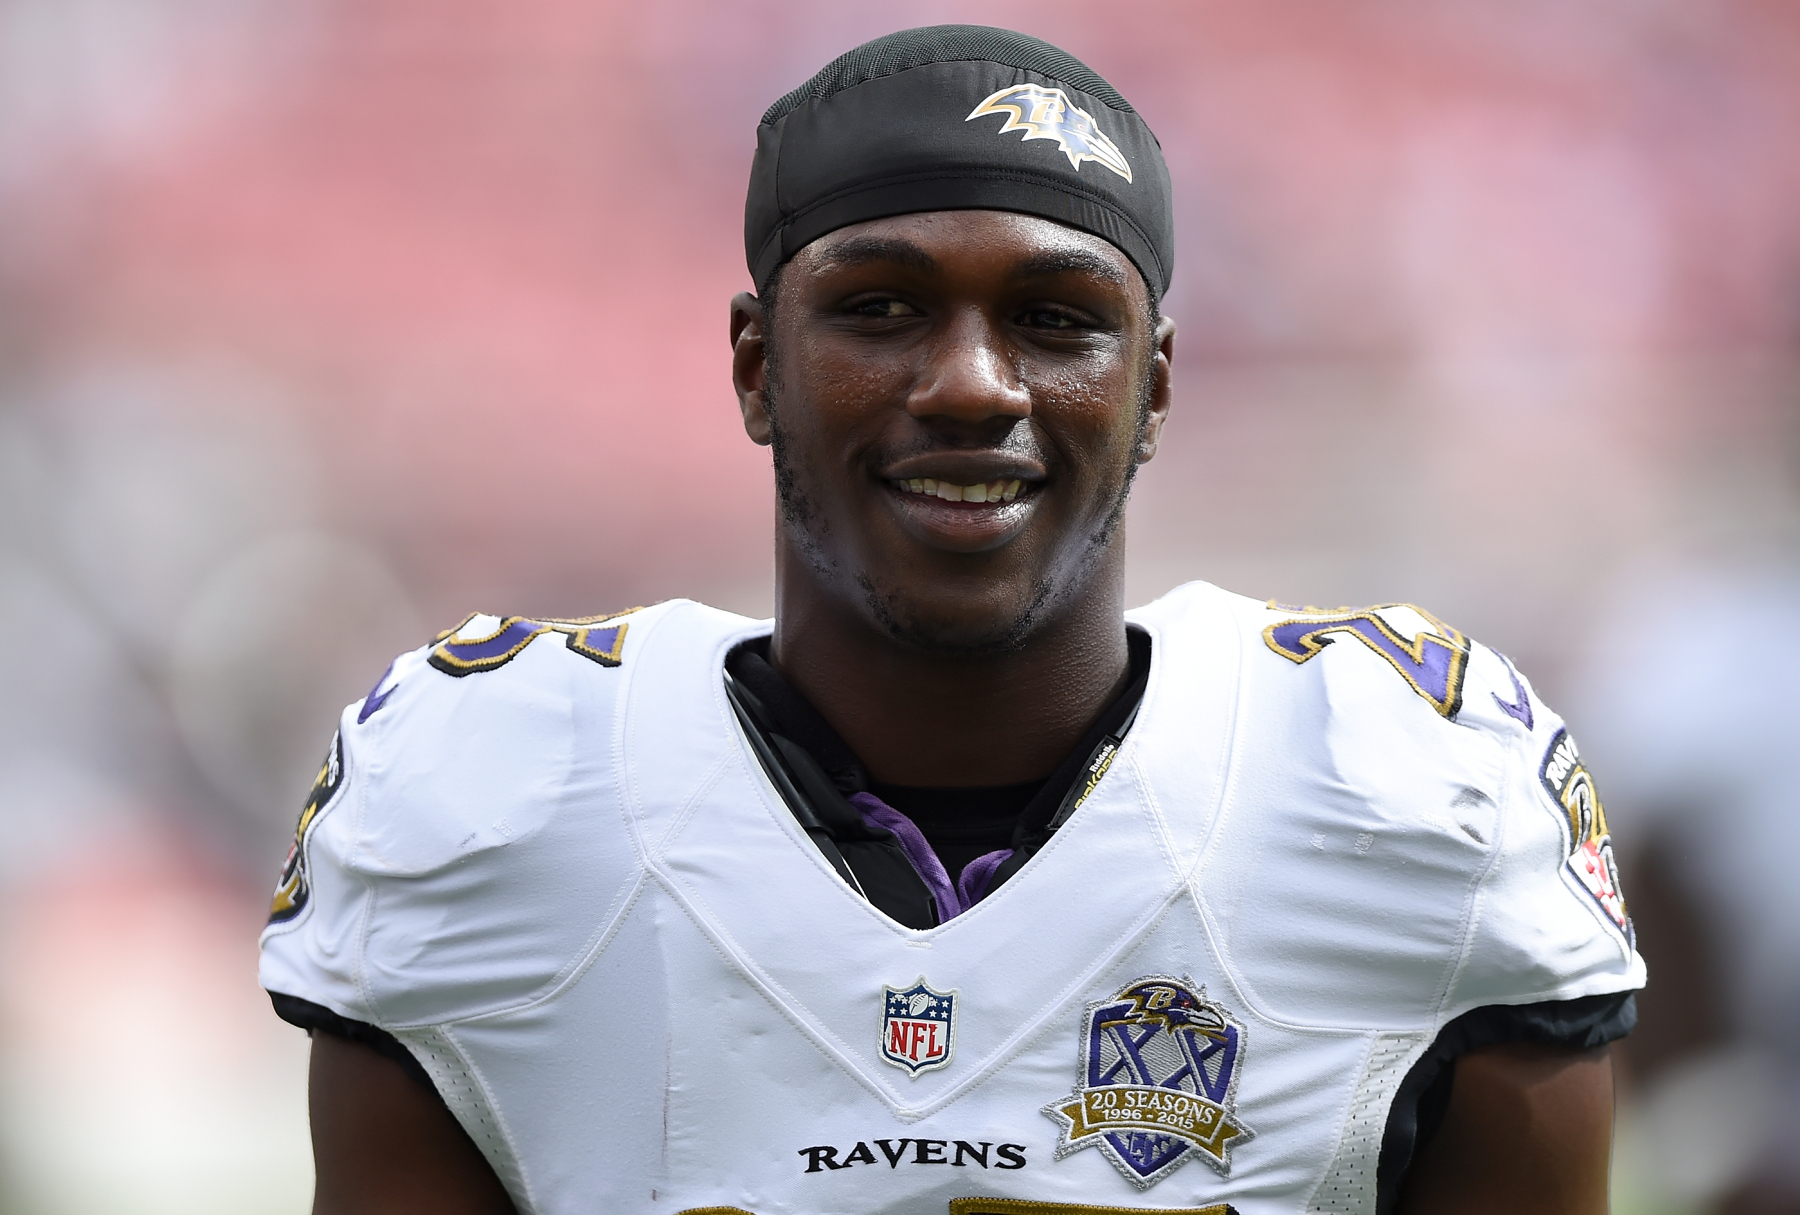 Tray Walker only spent a year with the Ravens, but he left an impact on many of his teammates. His life and career ultimately ended too soon.